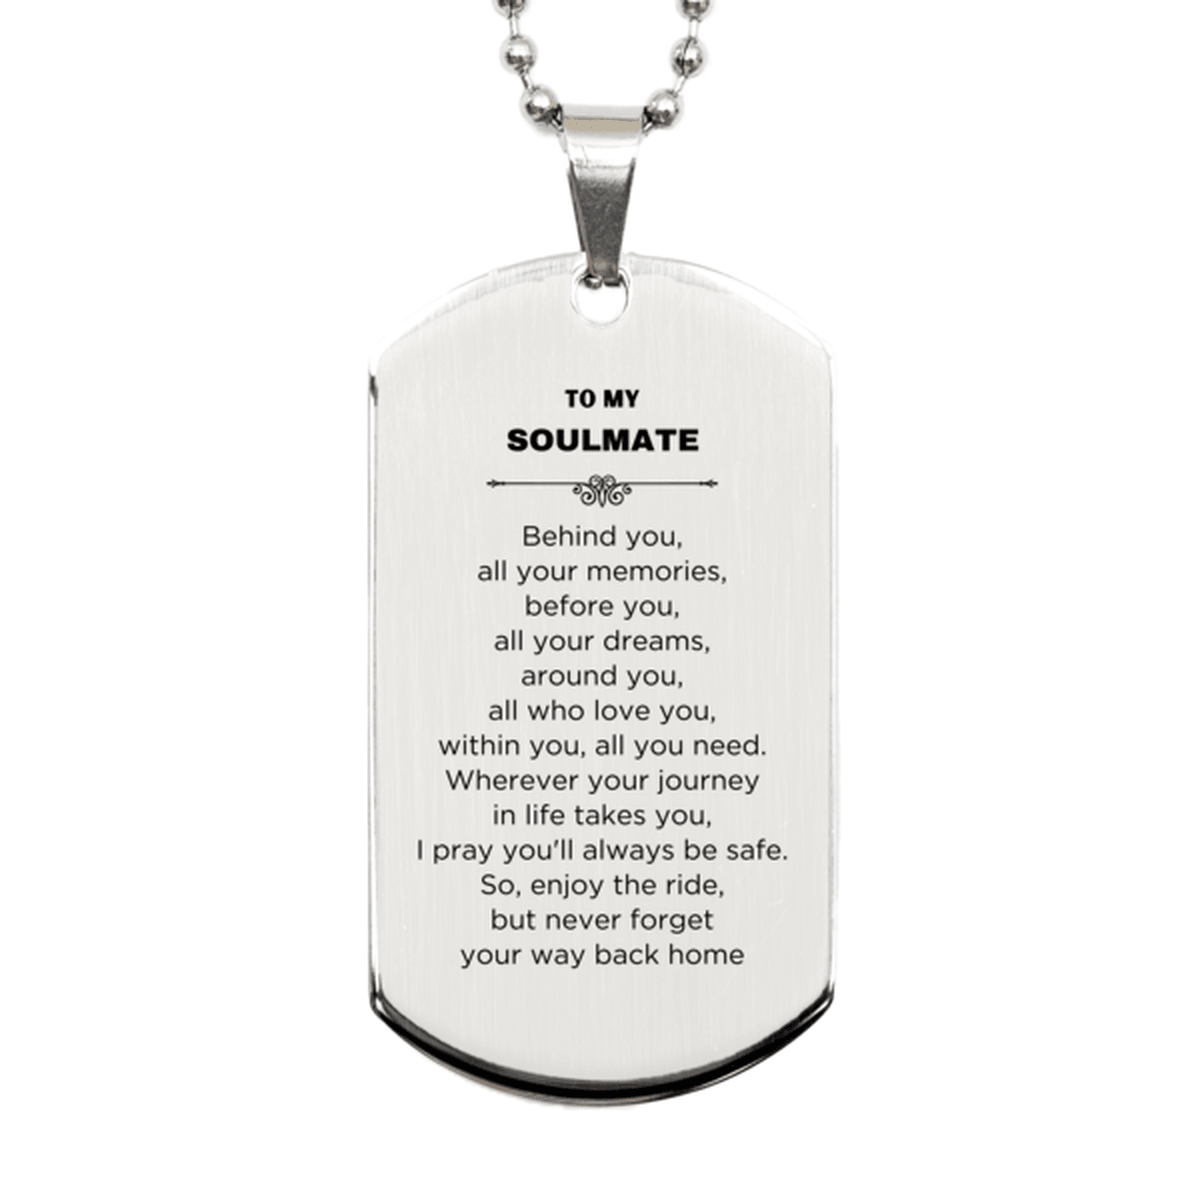 Inspirational Soulmate Engraved Silver Dog Tag Necklace - Behind you, all your Memories, Before you, all your Dreams - Birthday, Christmas Holiday Gifts - Mallard Moon Gift Shop